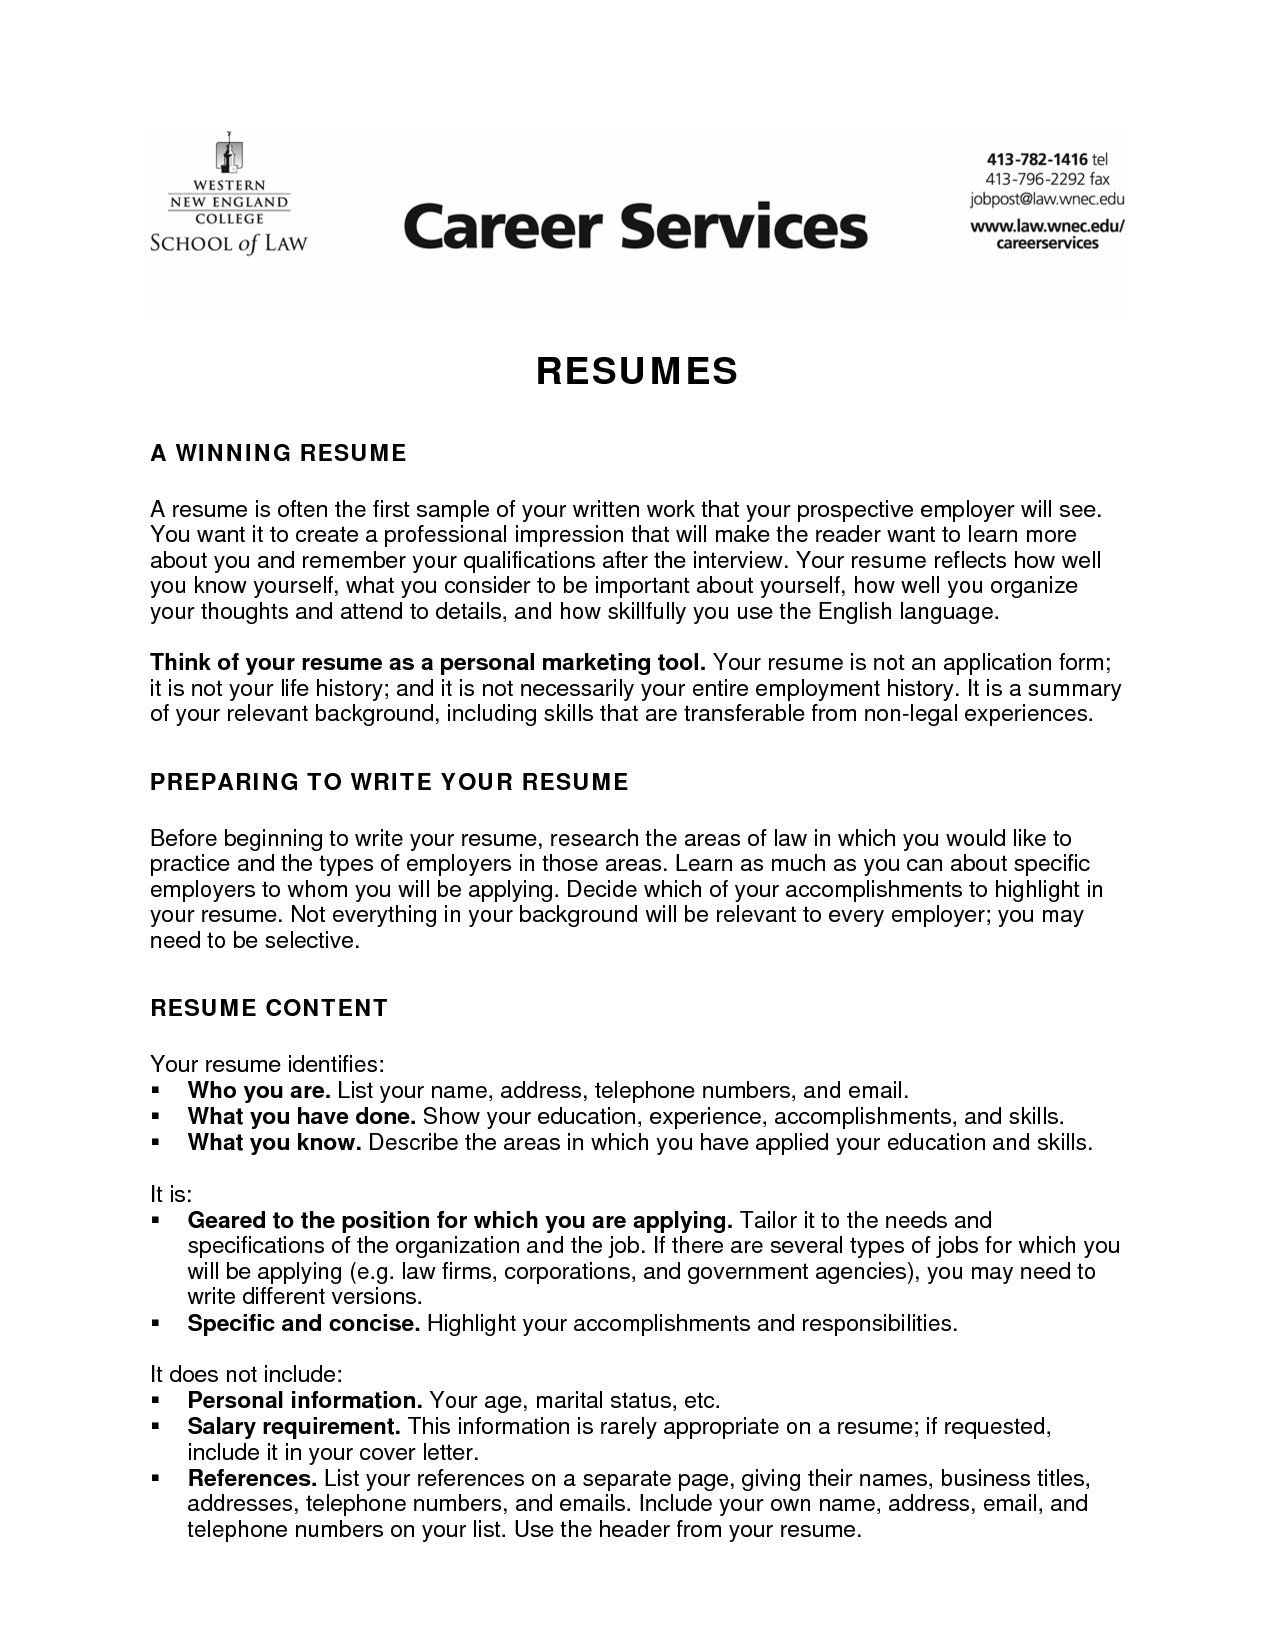 Resume Objective Examples  General Resume Objective Samples Free Free Download Warehouse Resume